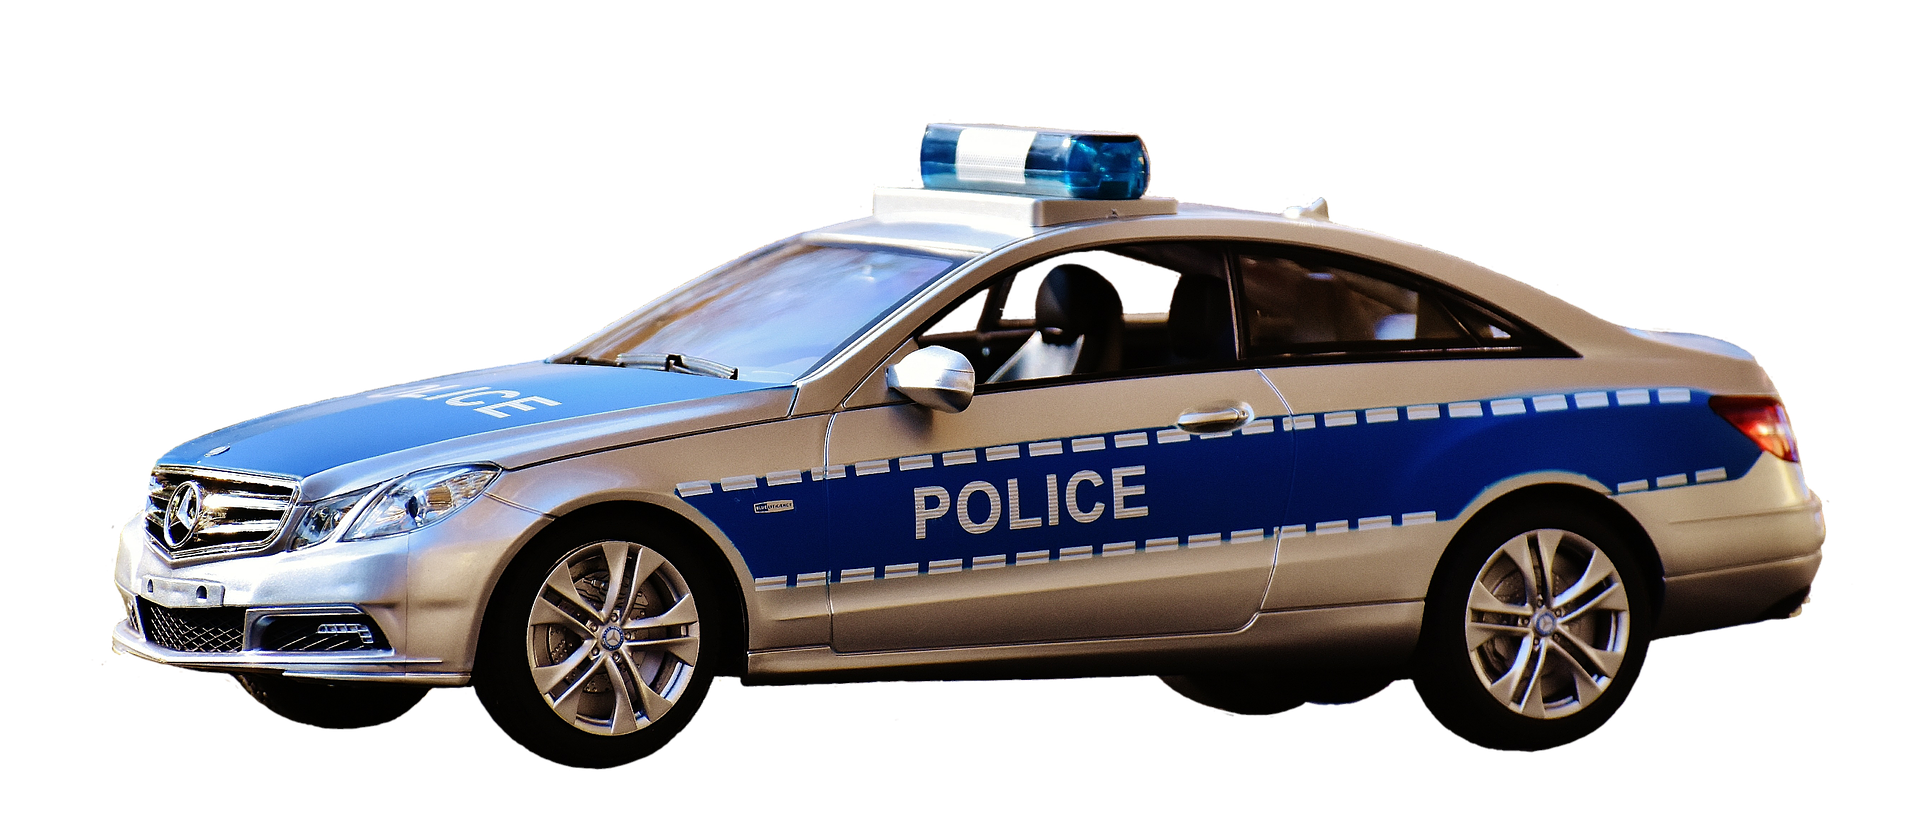 police-car-g44b14d0e1_1920.png